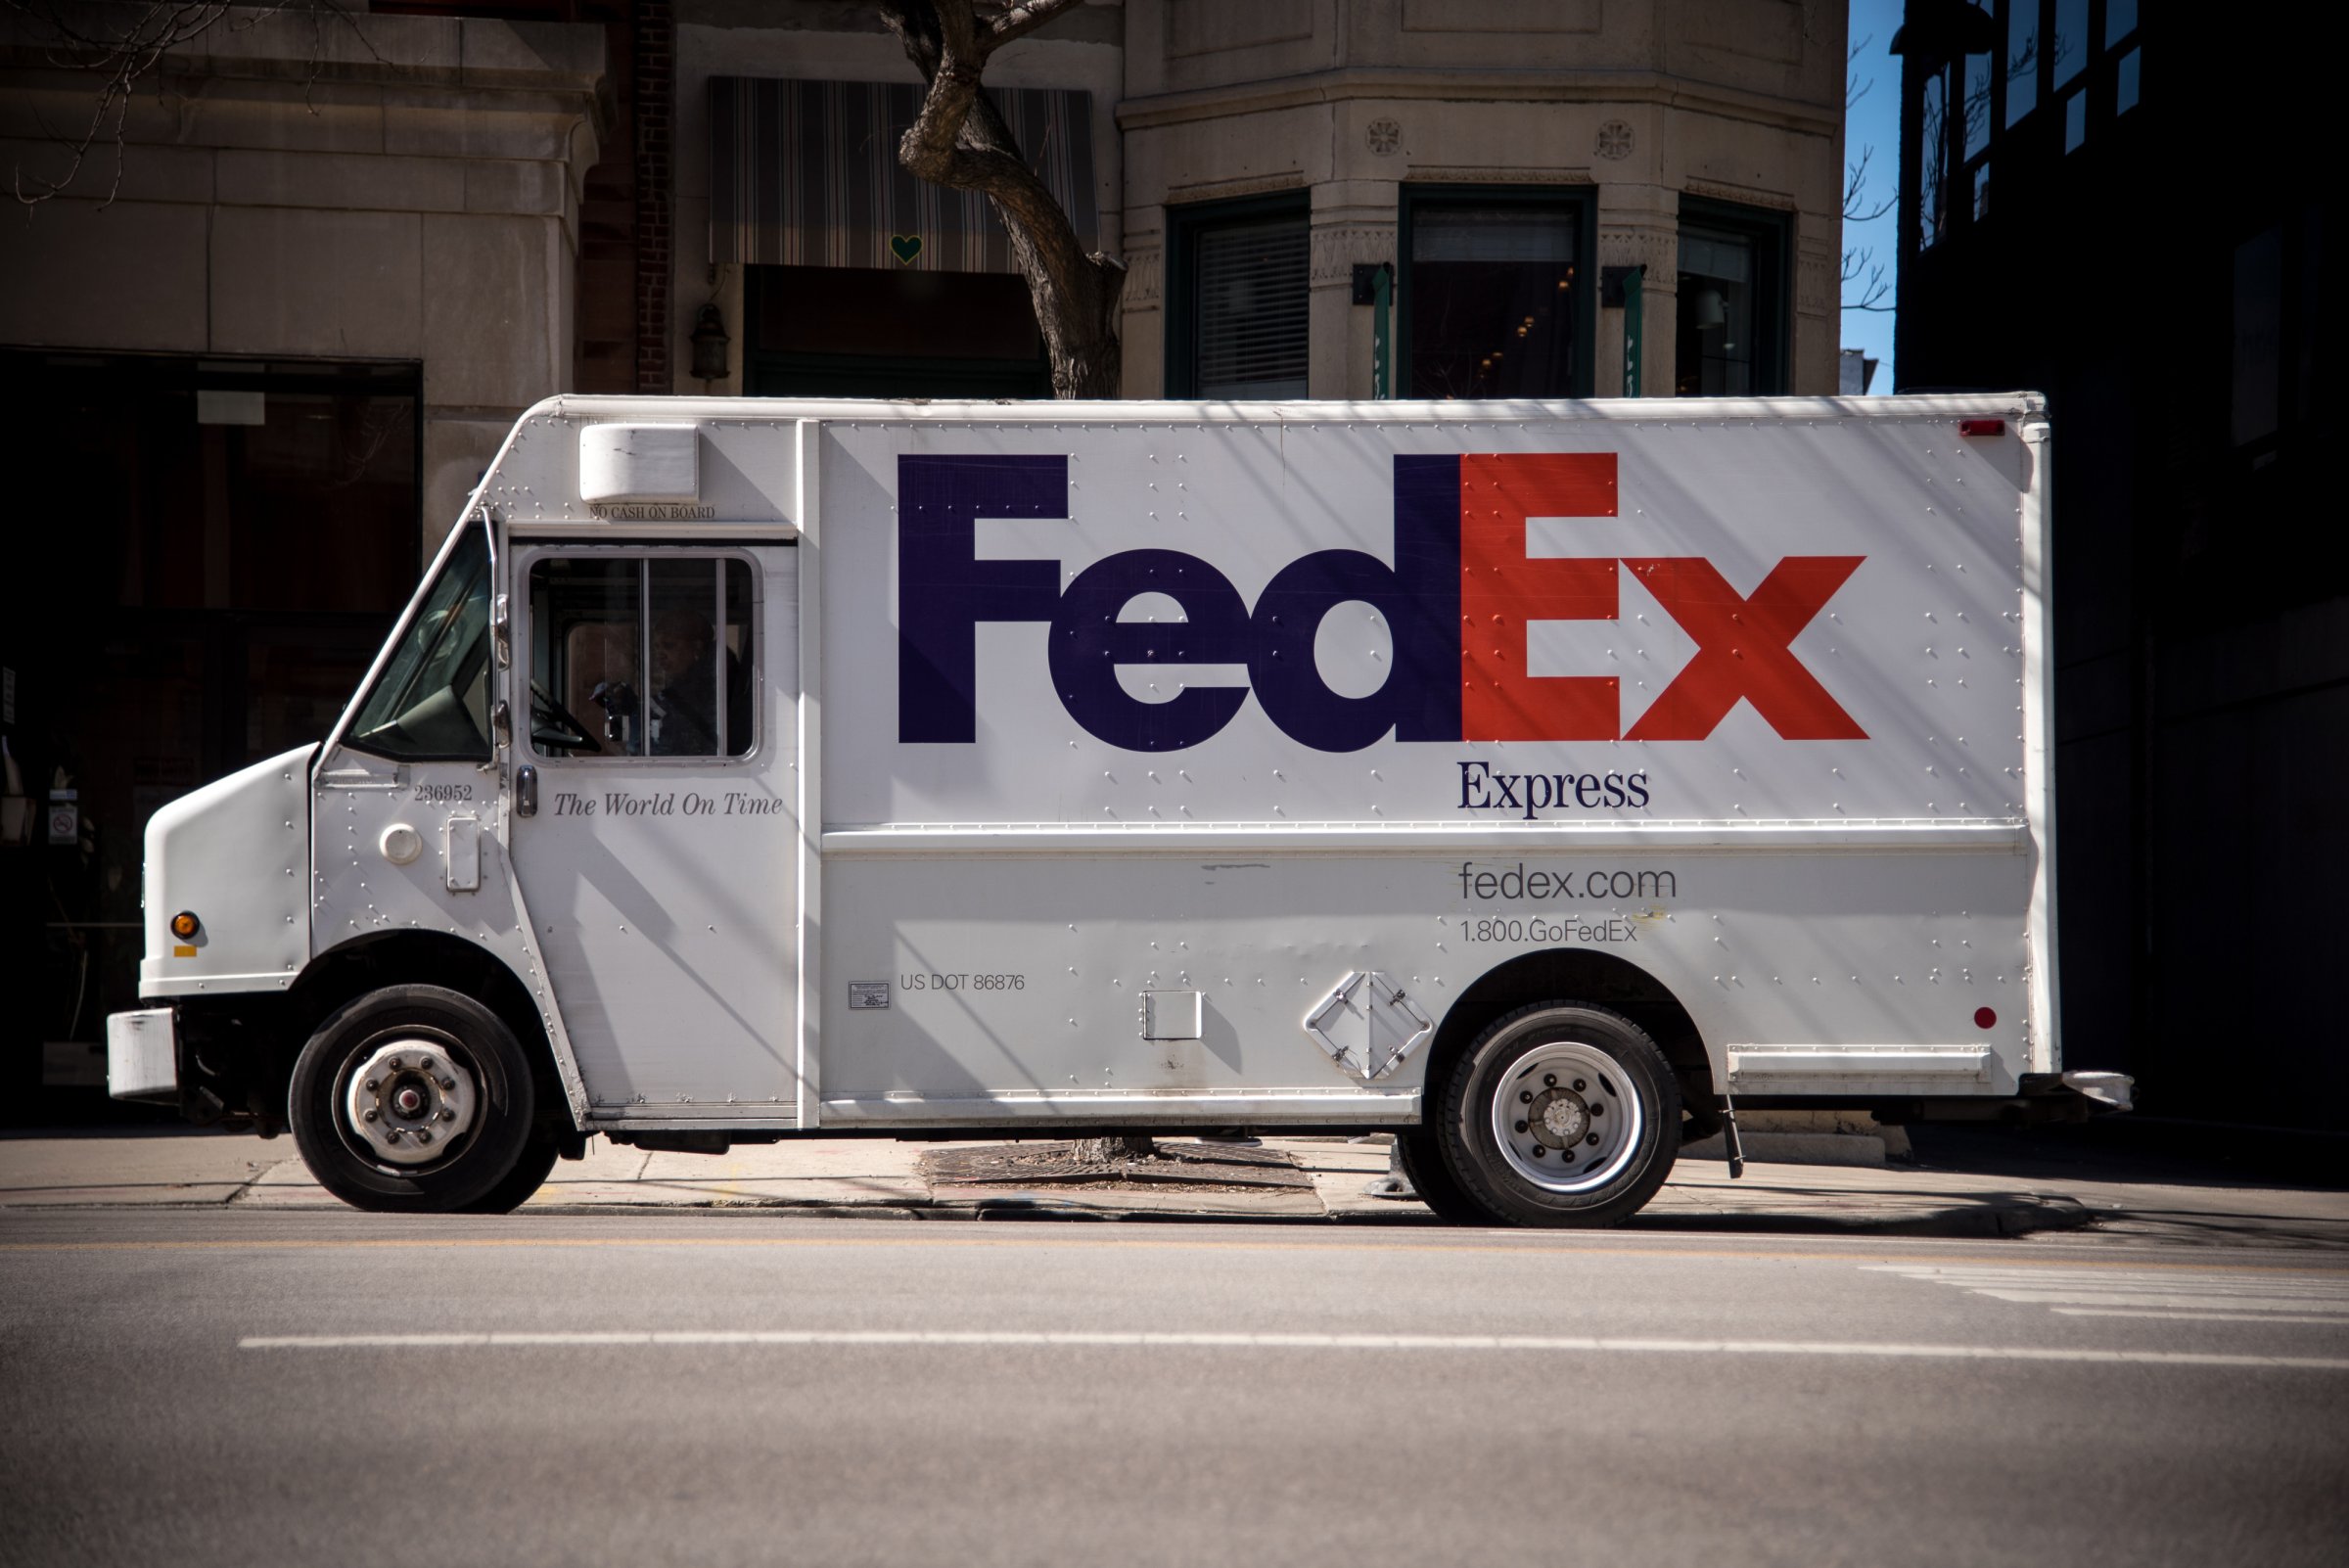 A FedEx Corp. delivery truck is parked on the street in Chicago, Illinois, U.S., on Friday, March 11, 2016.